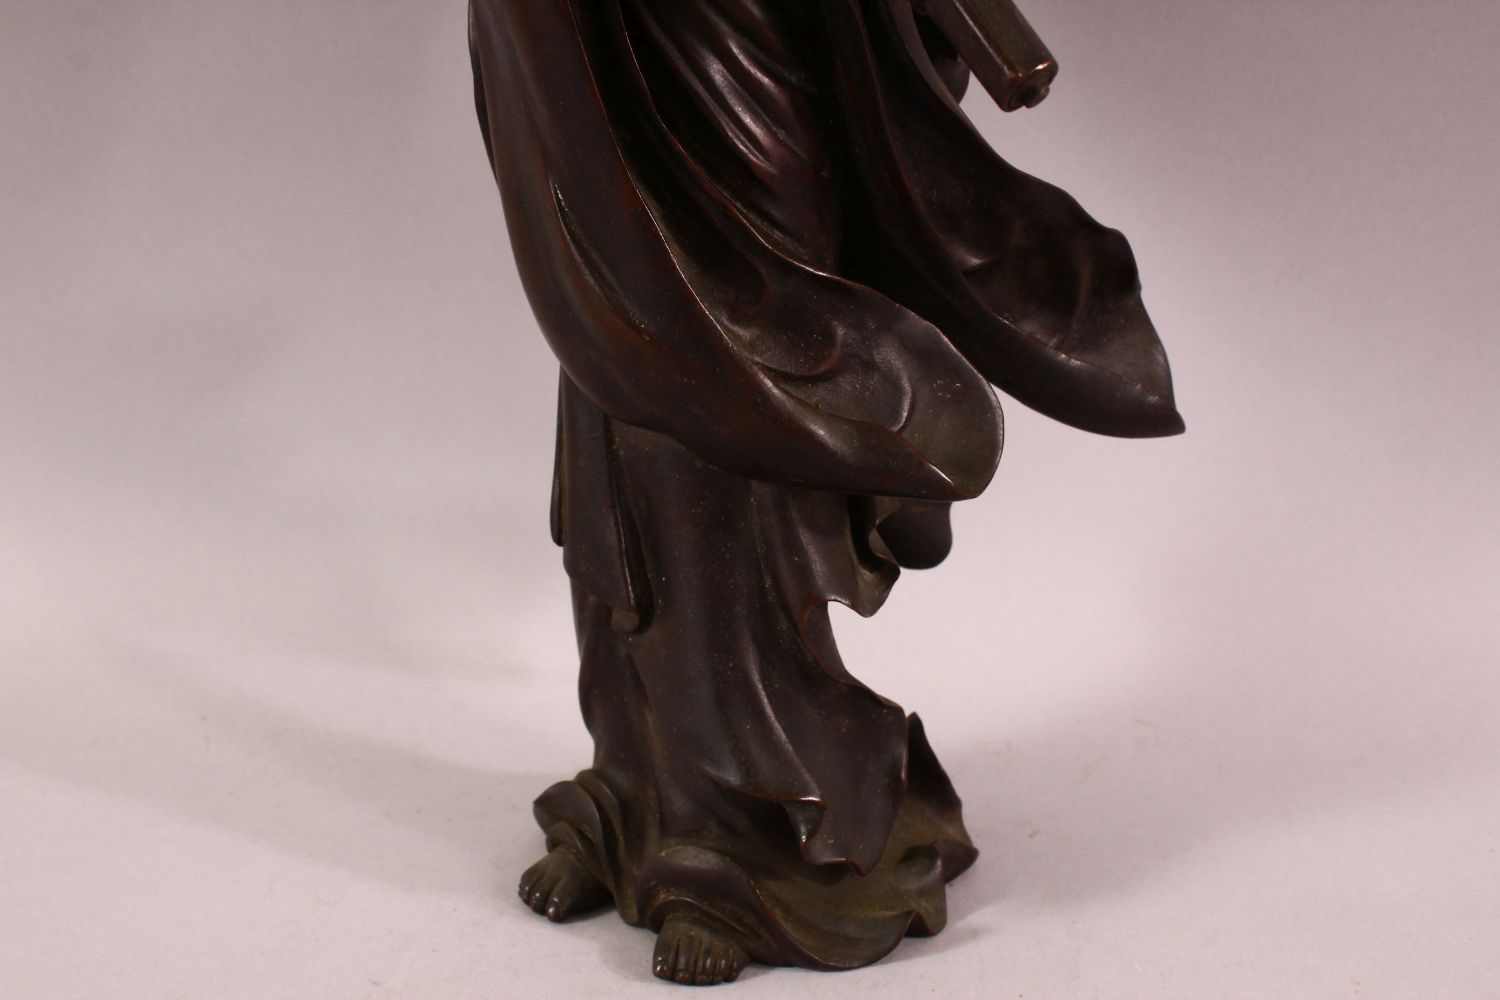 A CHINESE BRONZE FIGURE OF GUANYIN holding a scroll, her other hand raised in a mindfulness gesture, - Image 7 of 8